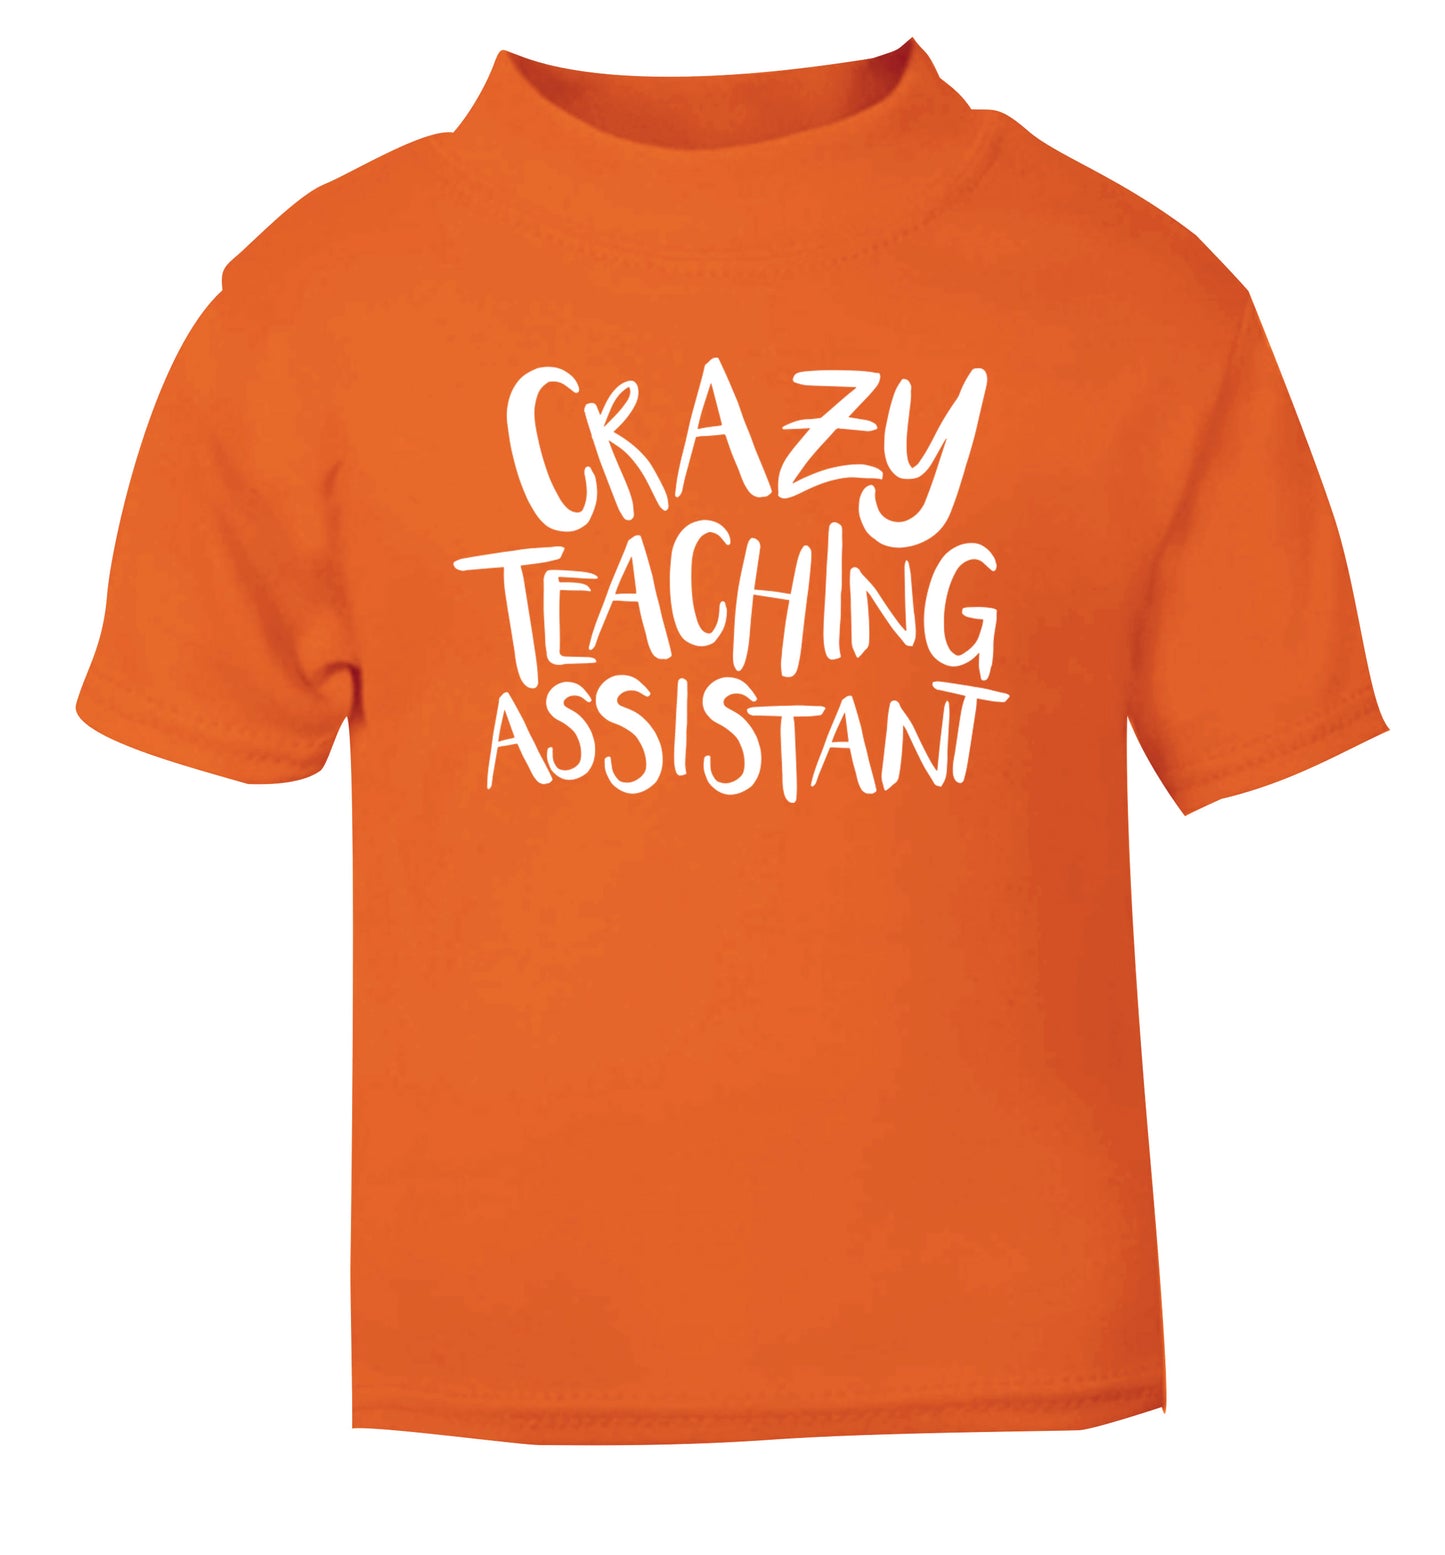 Crazy Teaching Assistant orange Baby Toddler Tshirt 2 Years